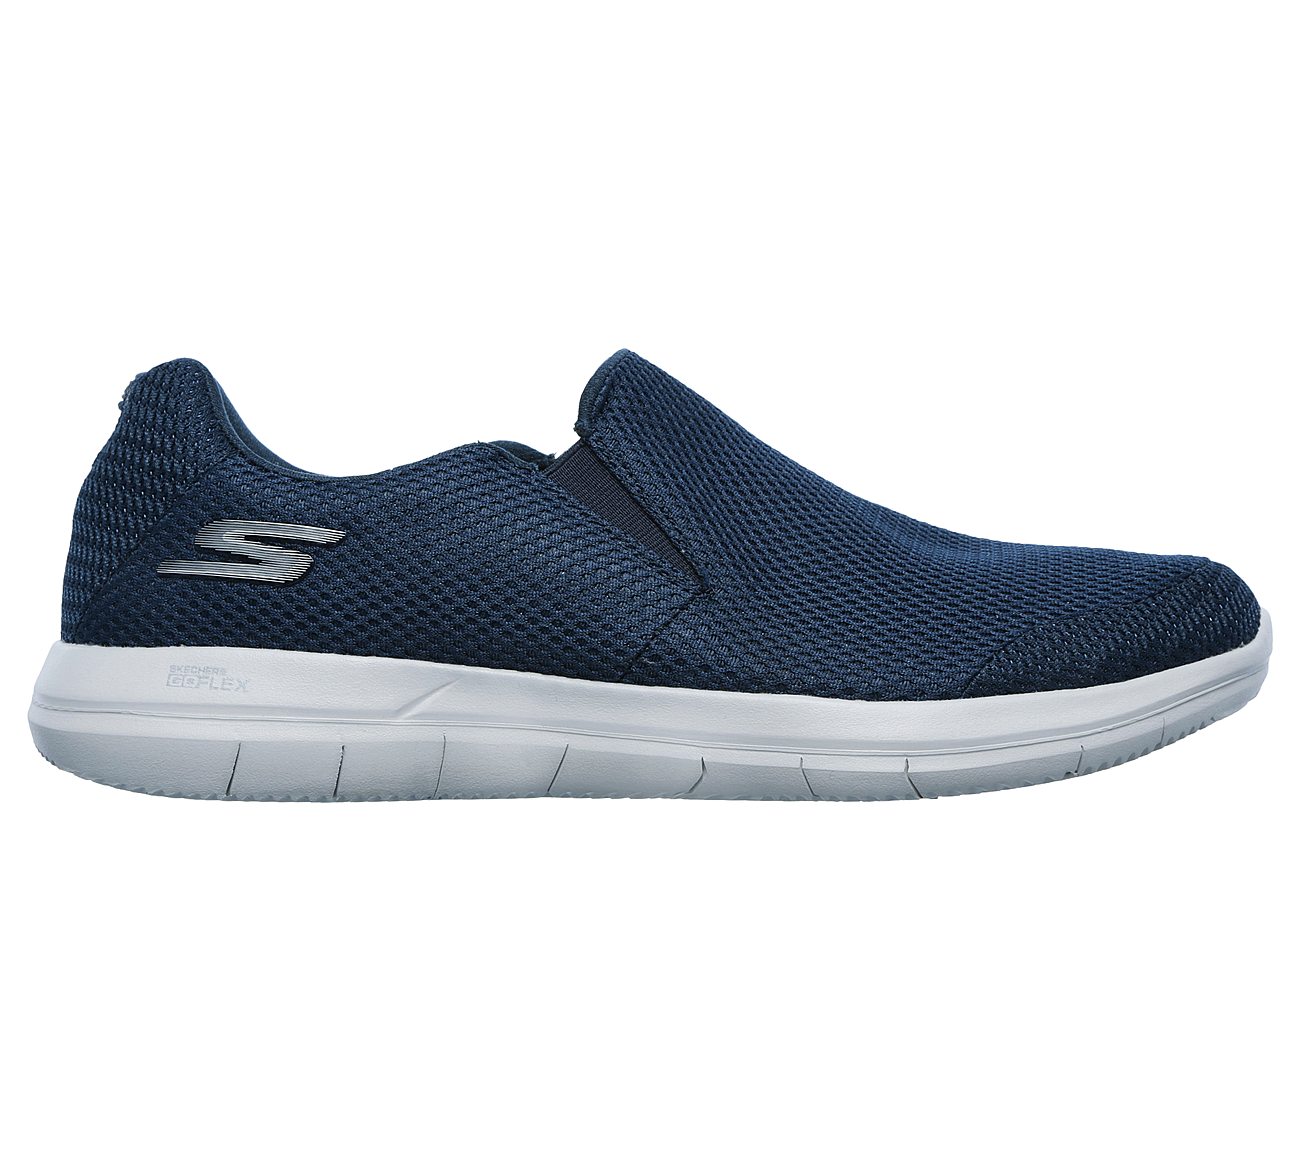 GO FLEX 2 - COMPLETION, NAVY/GREY Footwear Right View